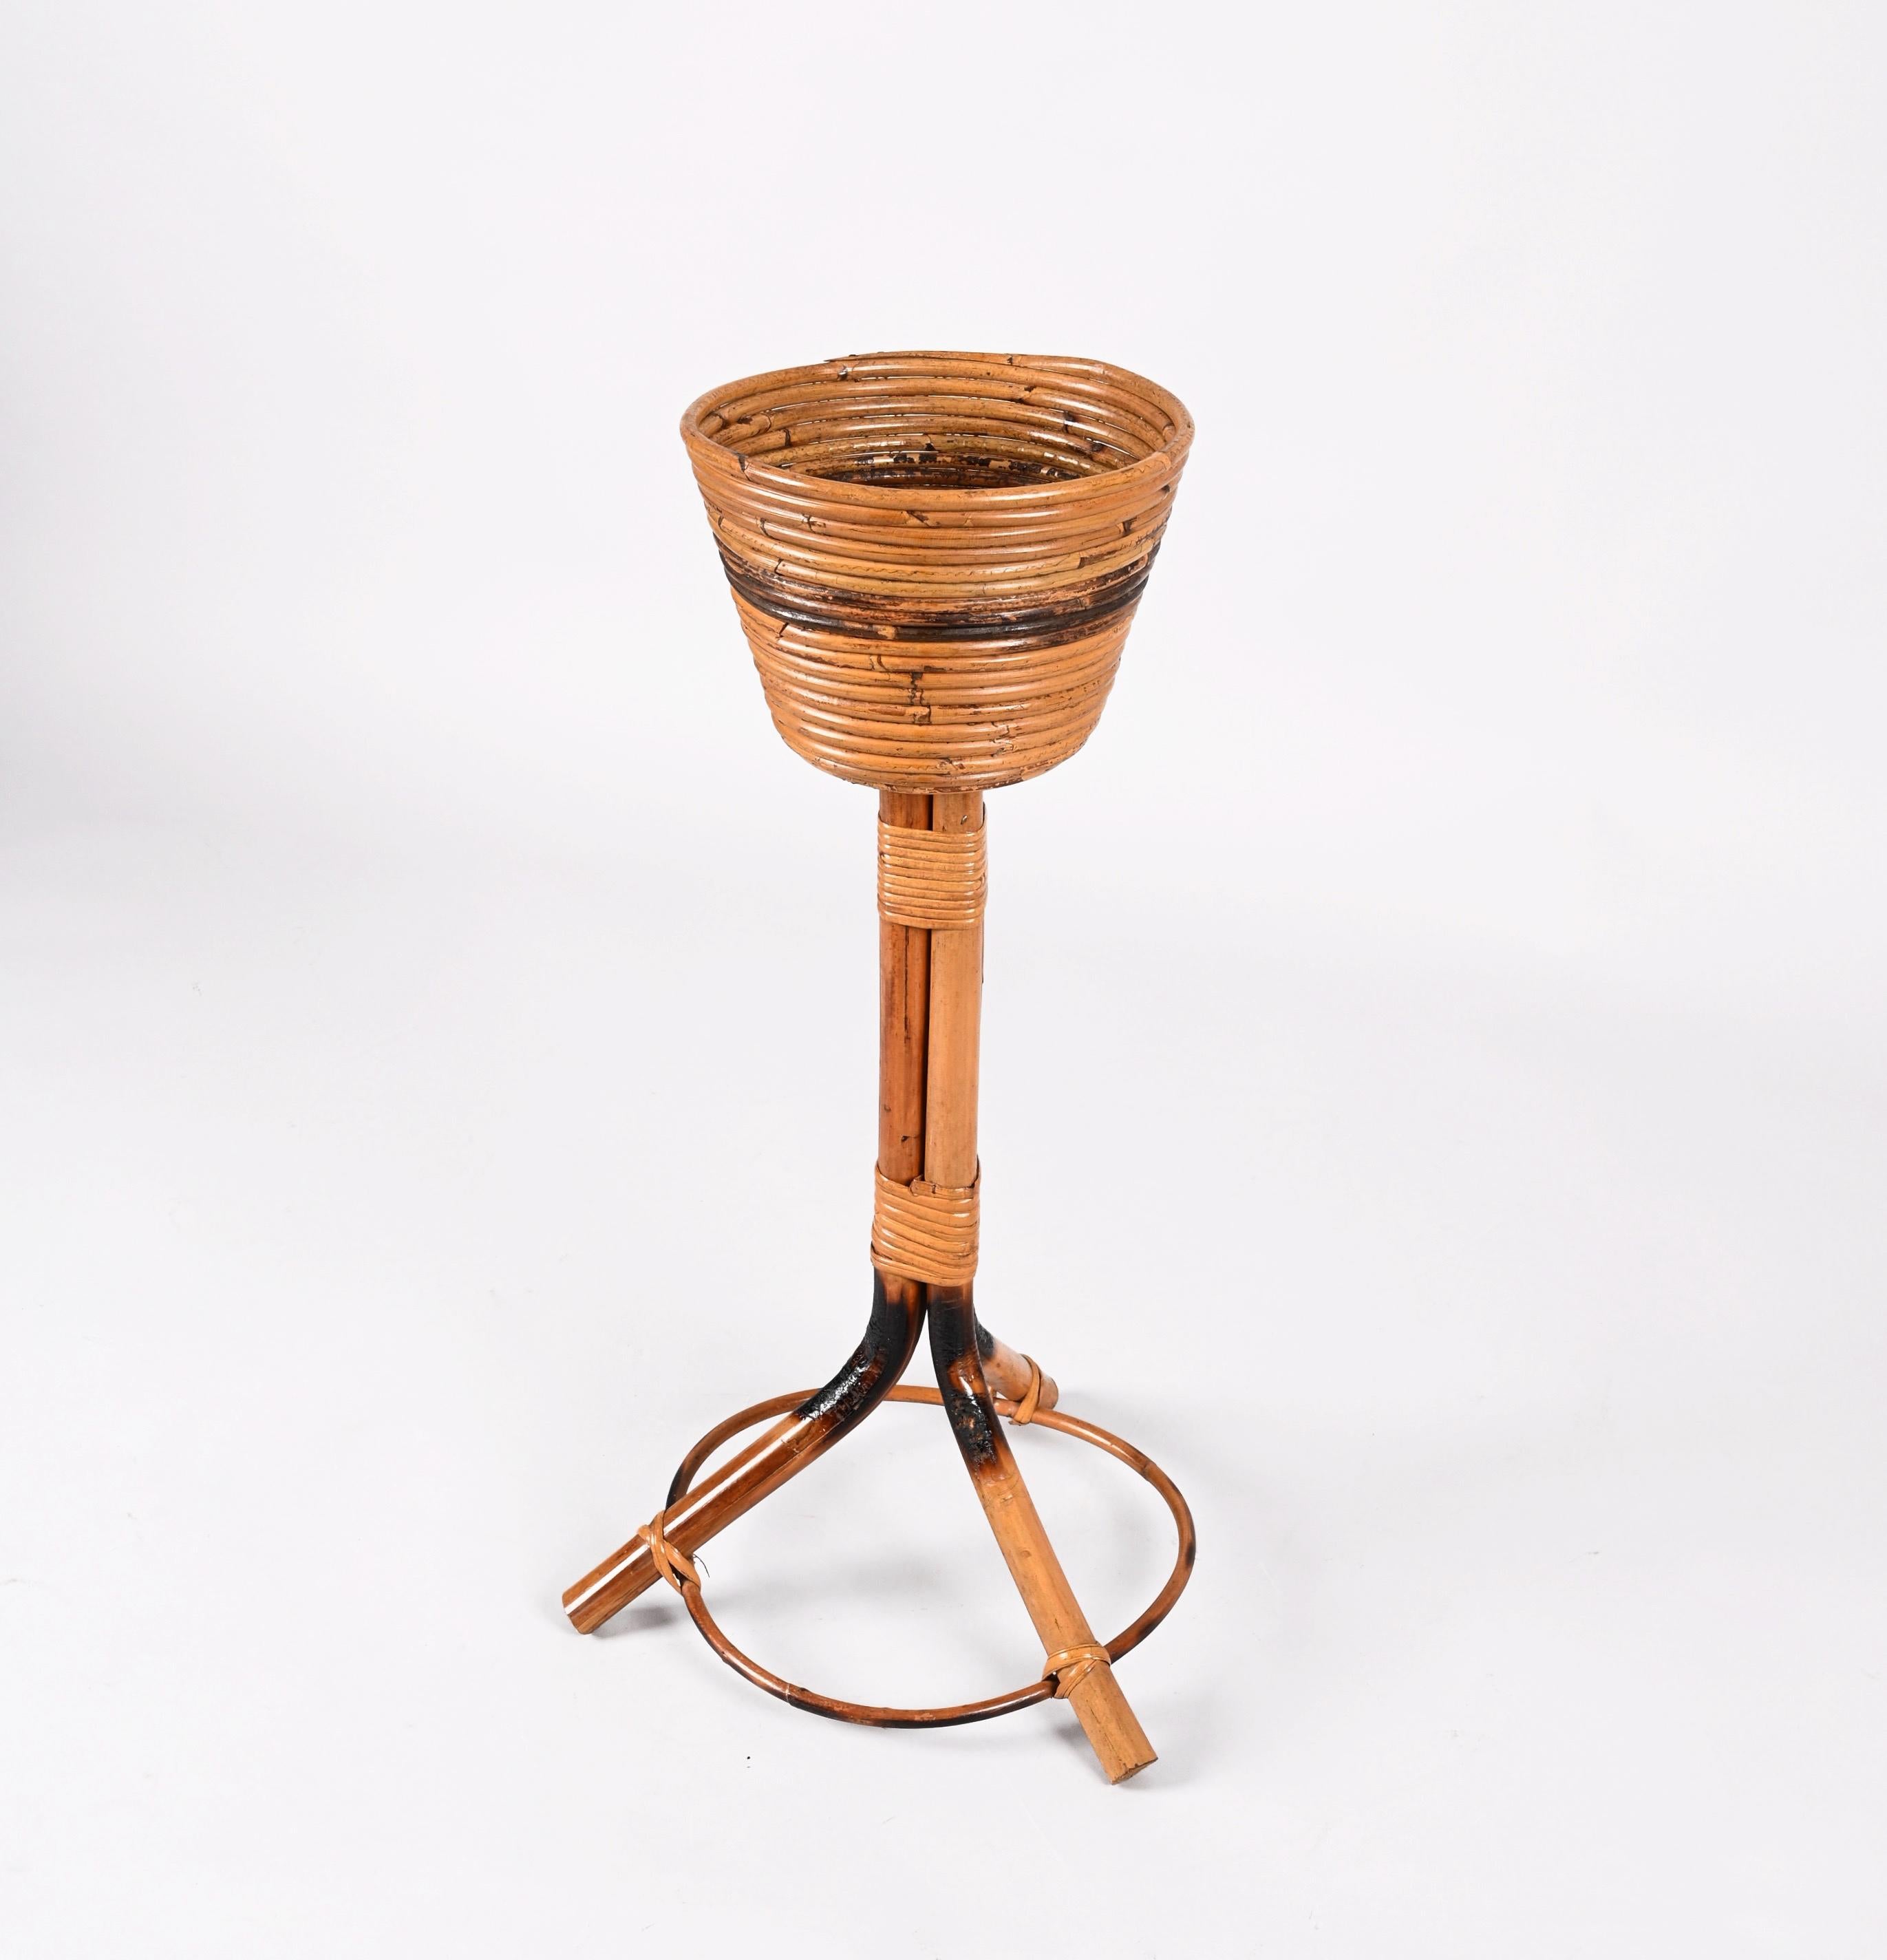 Midcentury Italian Bamboo Cane and Rattan Round Plant Holder, 1950s For Sale 3